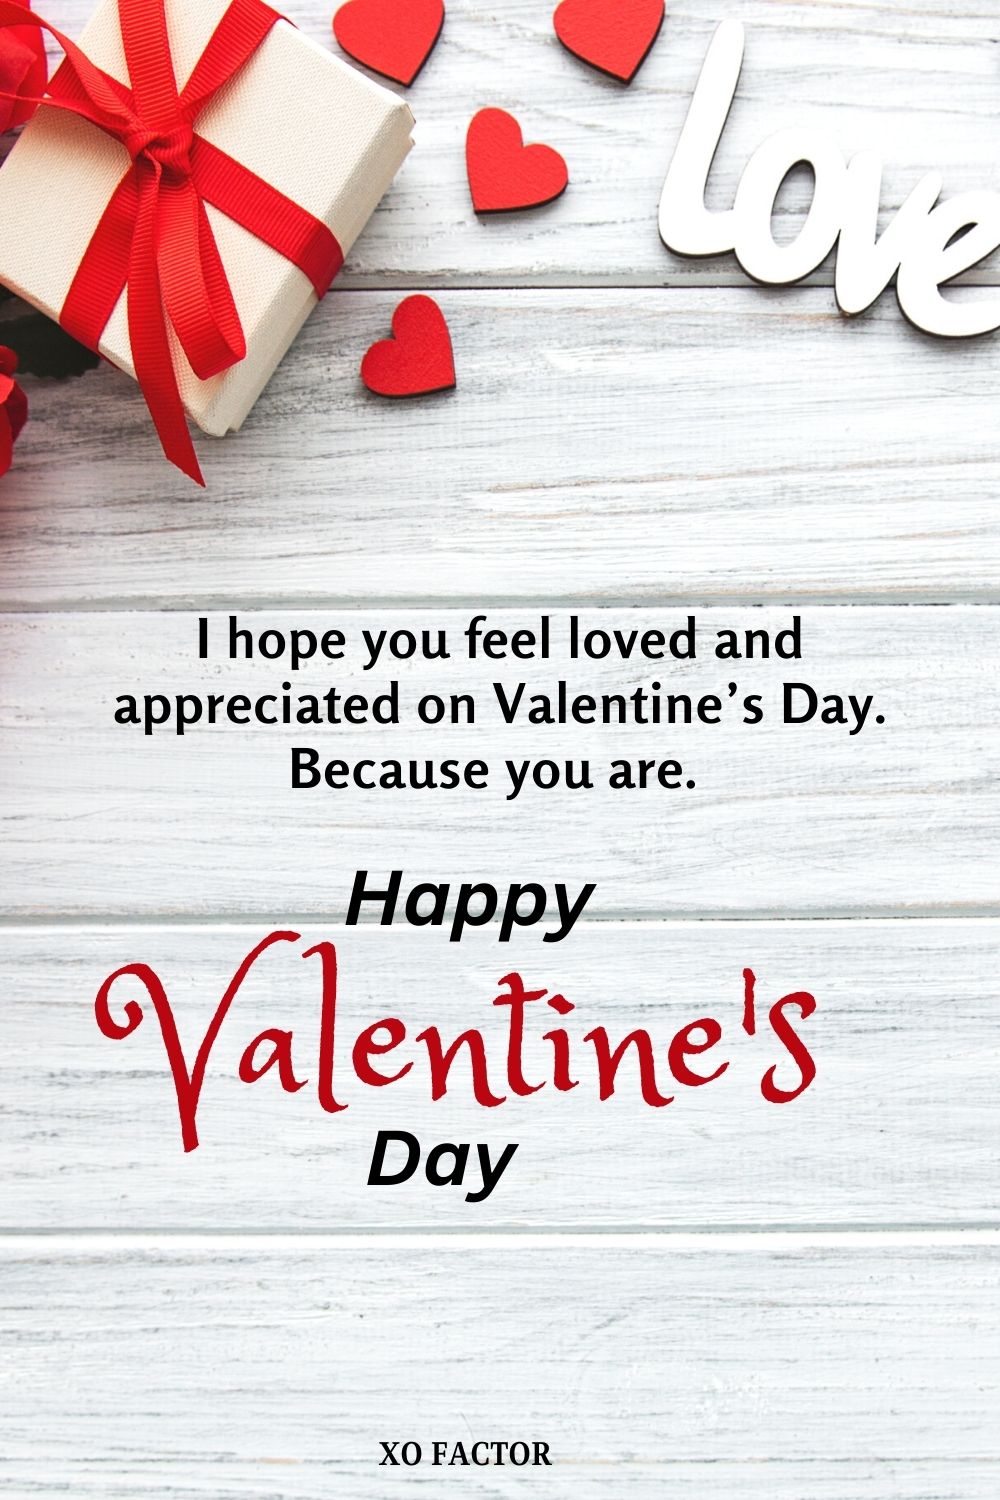 I hope you feel loved and appreciated on Valentine’s Day. Because you are. “Happy Valentine’s Day, Sweetheart.”